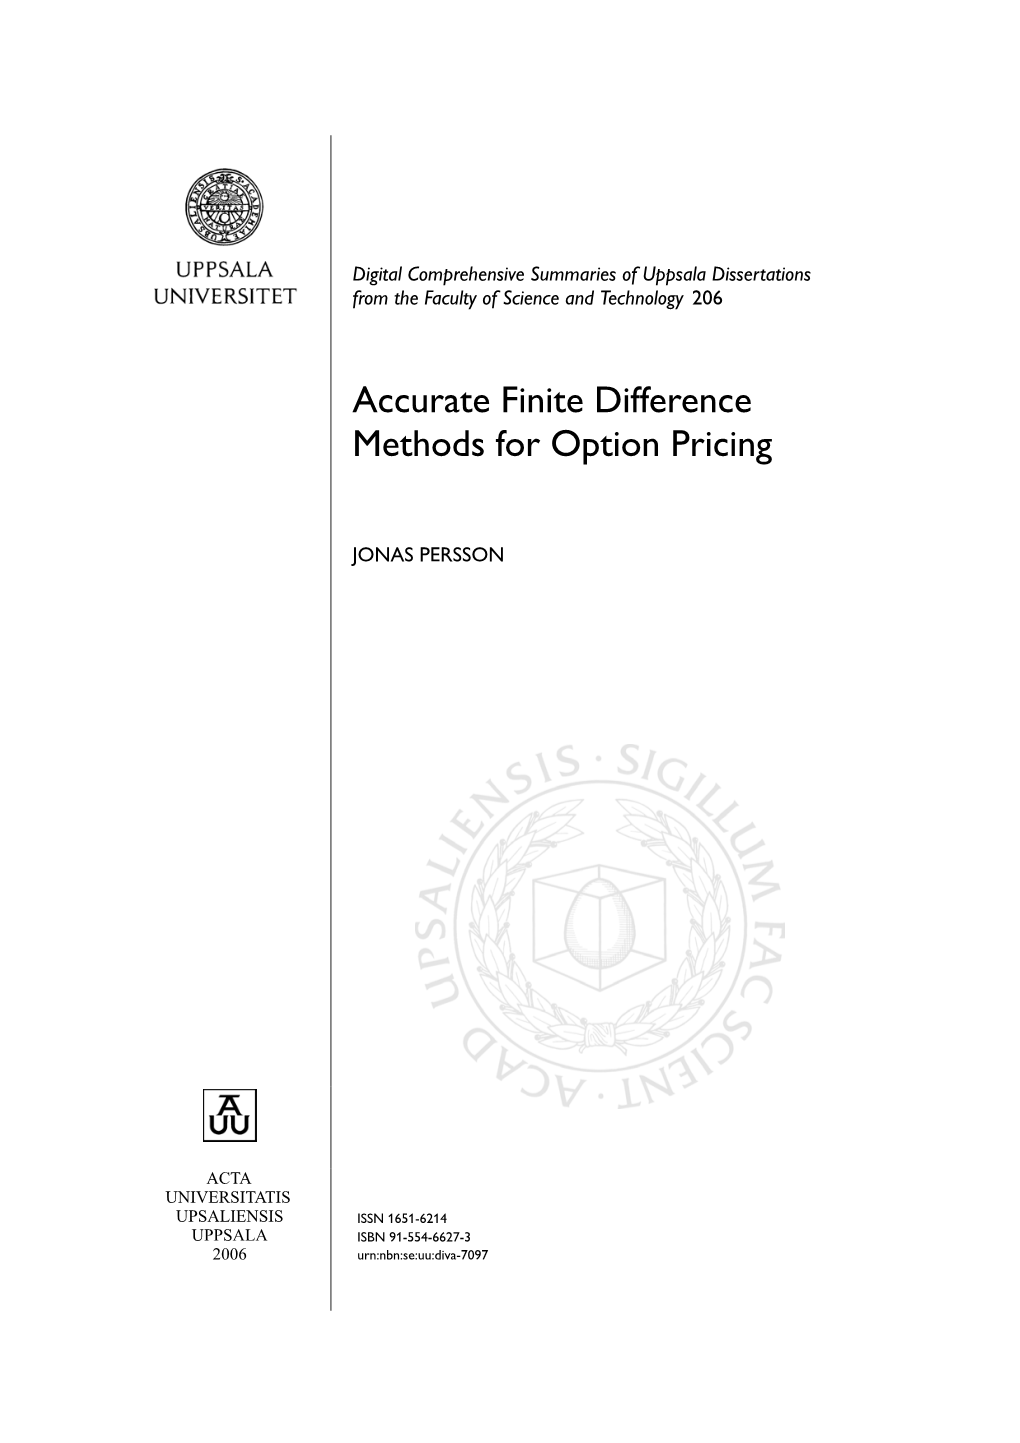 Accurate Finite Difference Methods for Option Pricing